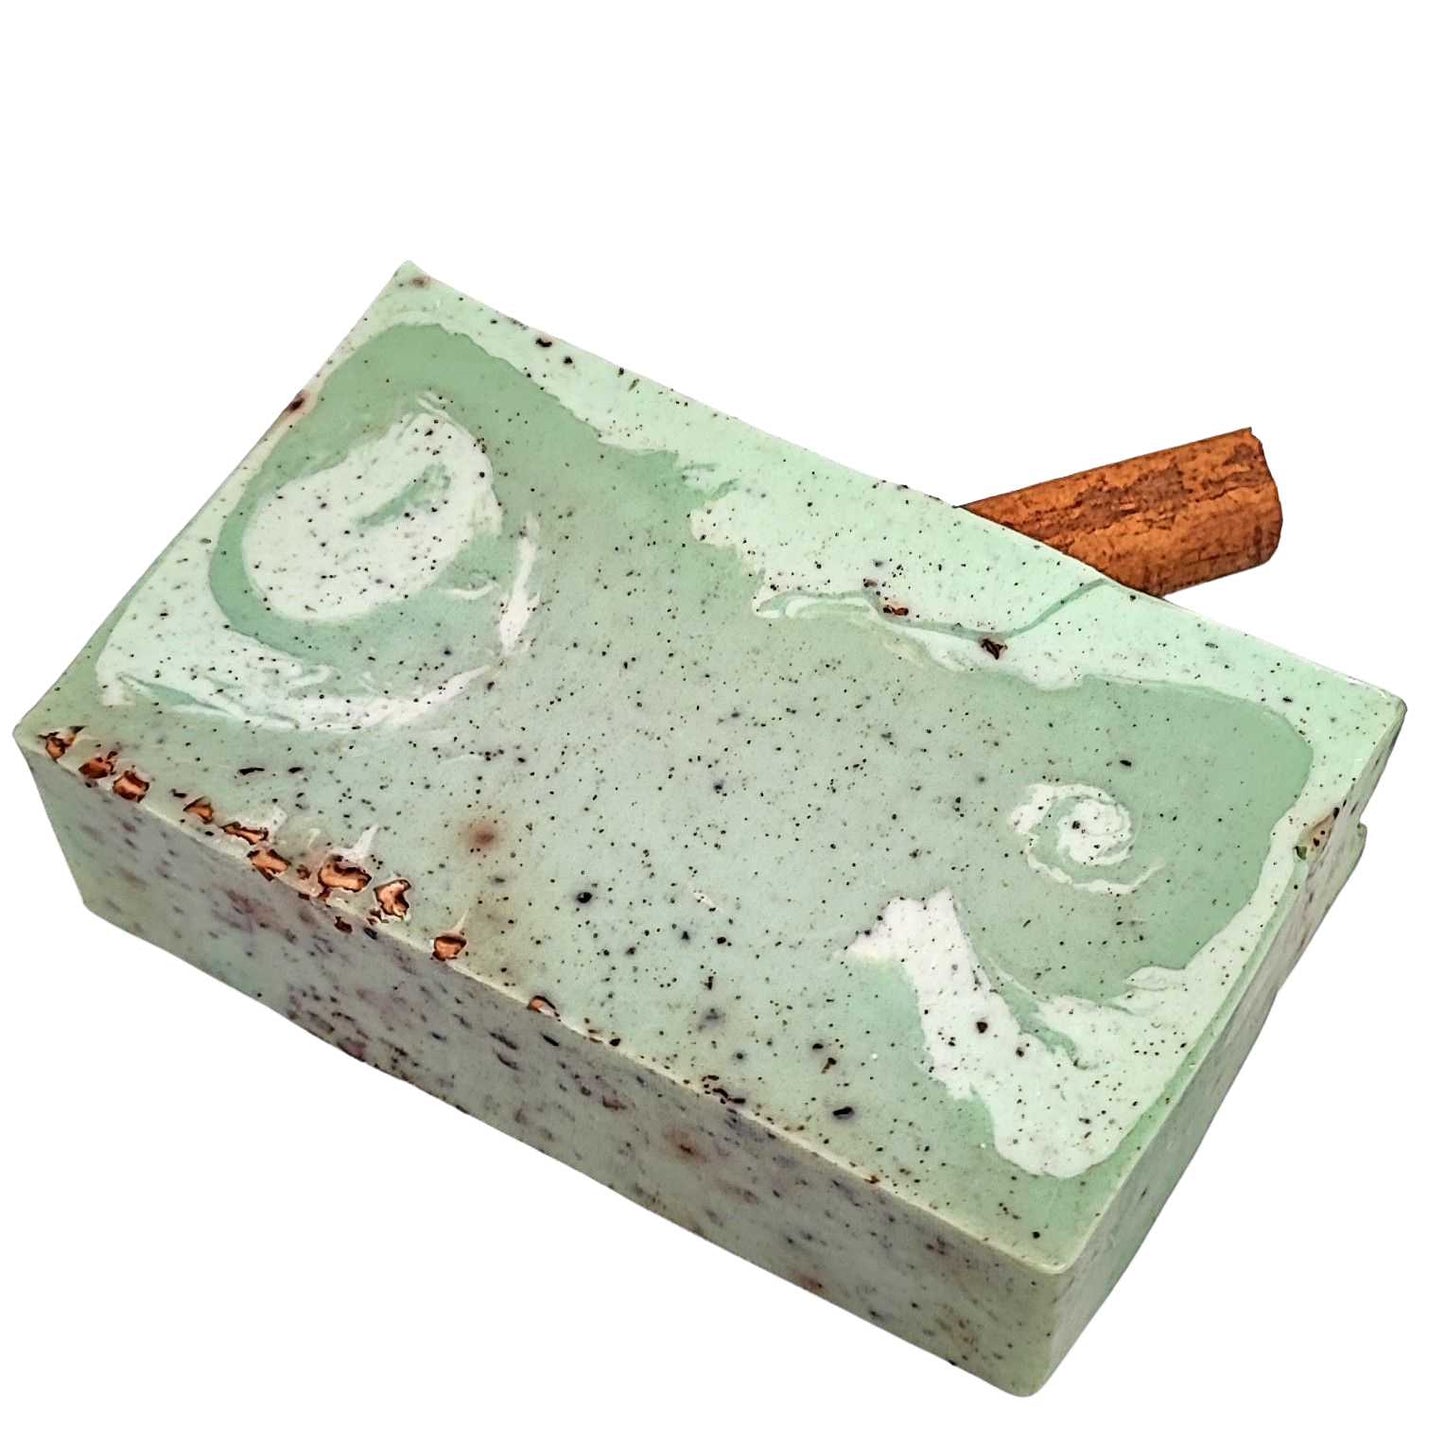 Soap Bar -Apple & Cinnamon -4oz -Fruity & Spicy Scent -Aromes Evasions 